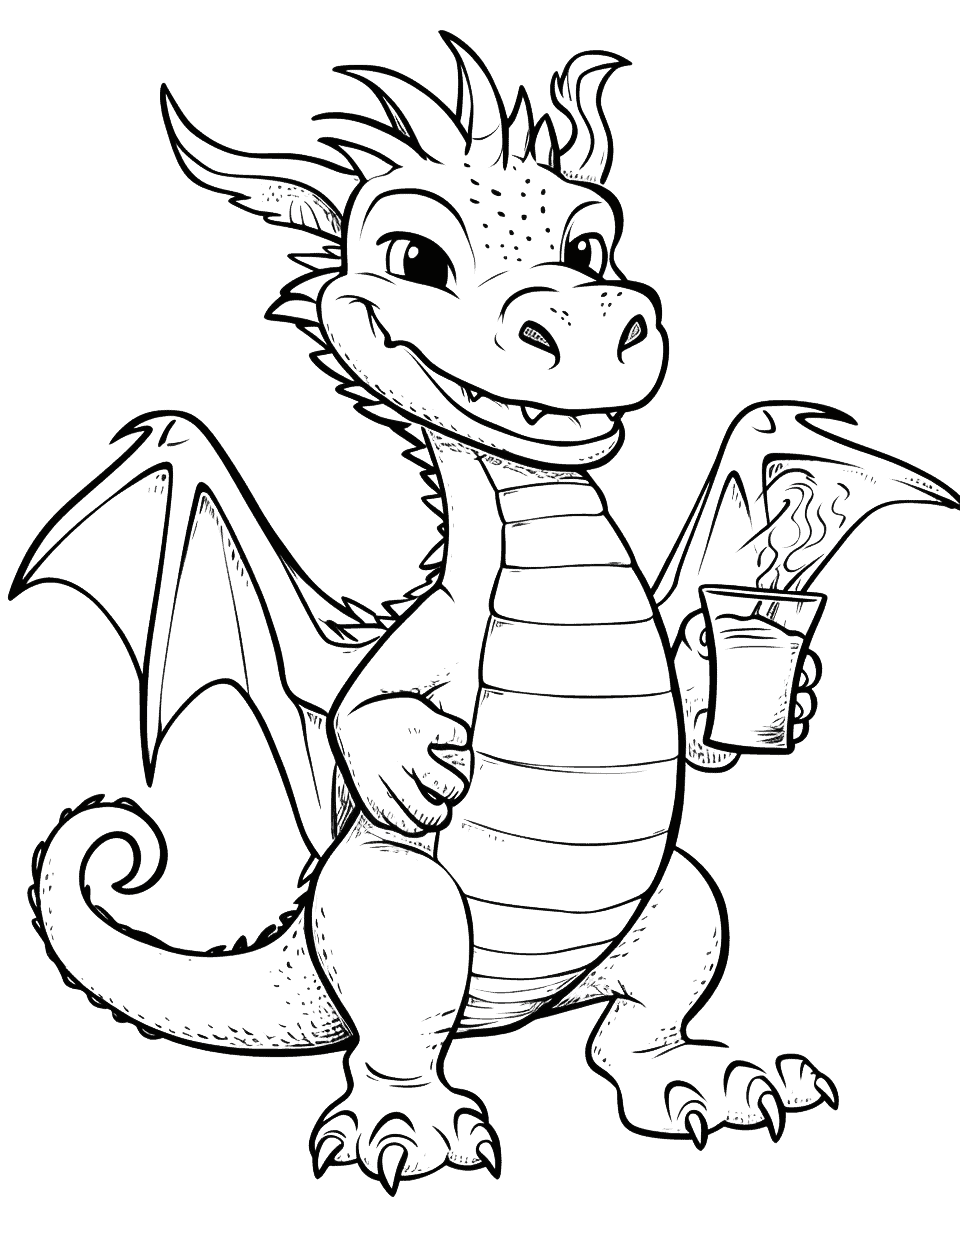 Cool Dragon Coloring Page - A cool dragon, with a laid back attitutde and sipping a drink.